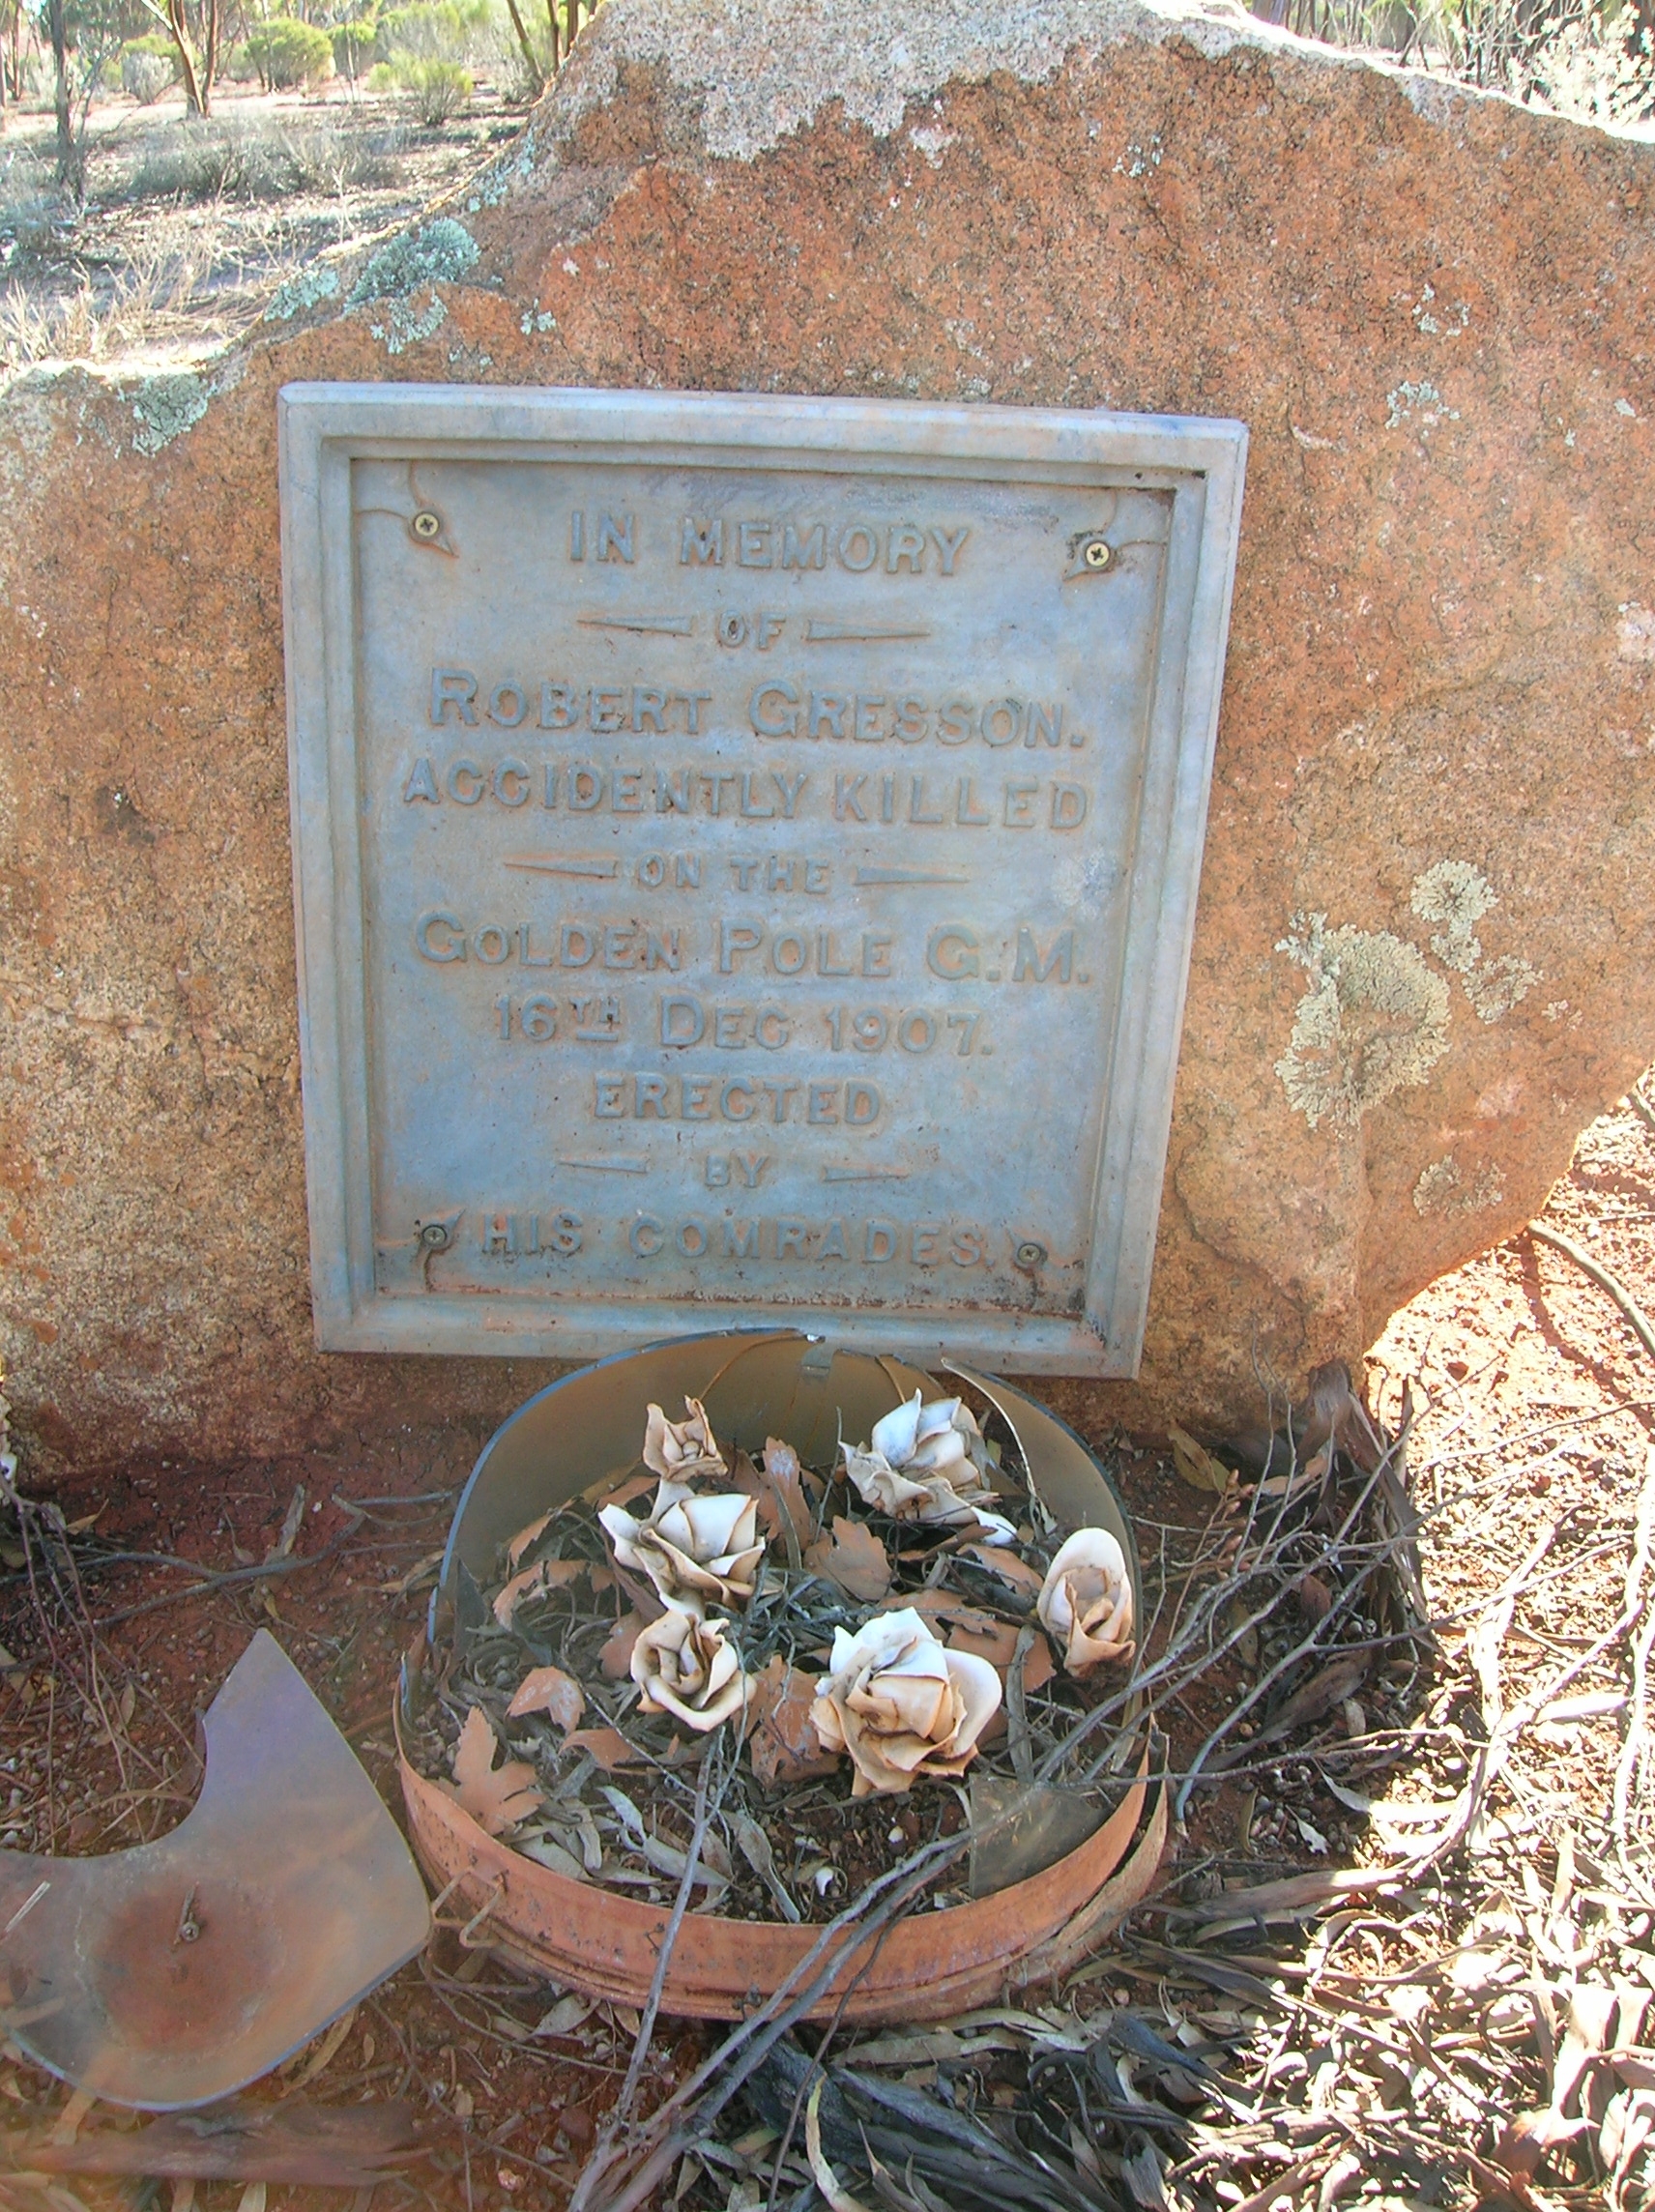 This is a photograph of the Memorial on the grave of Robert GRESSON